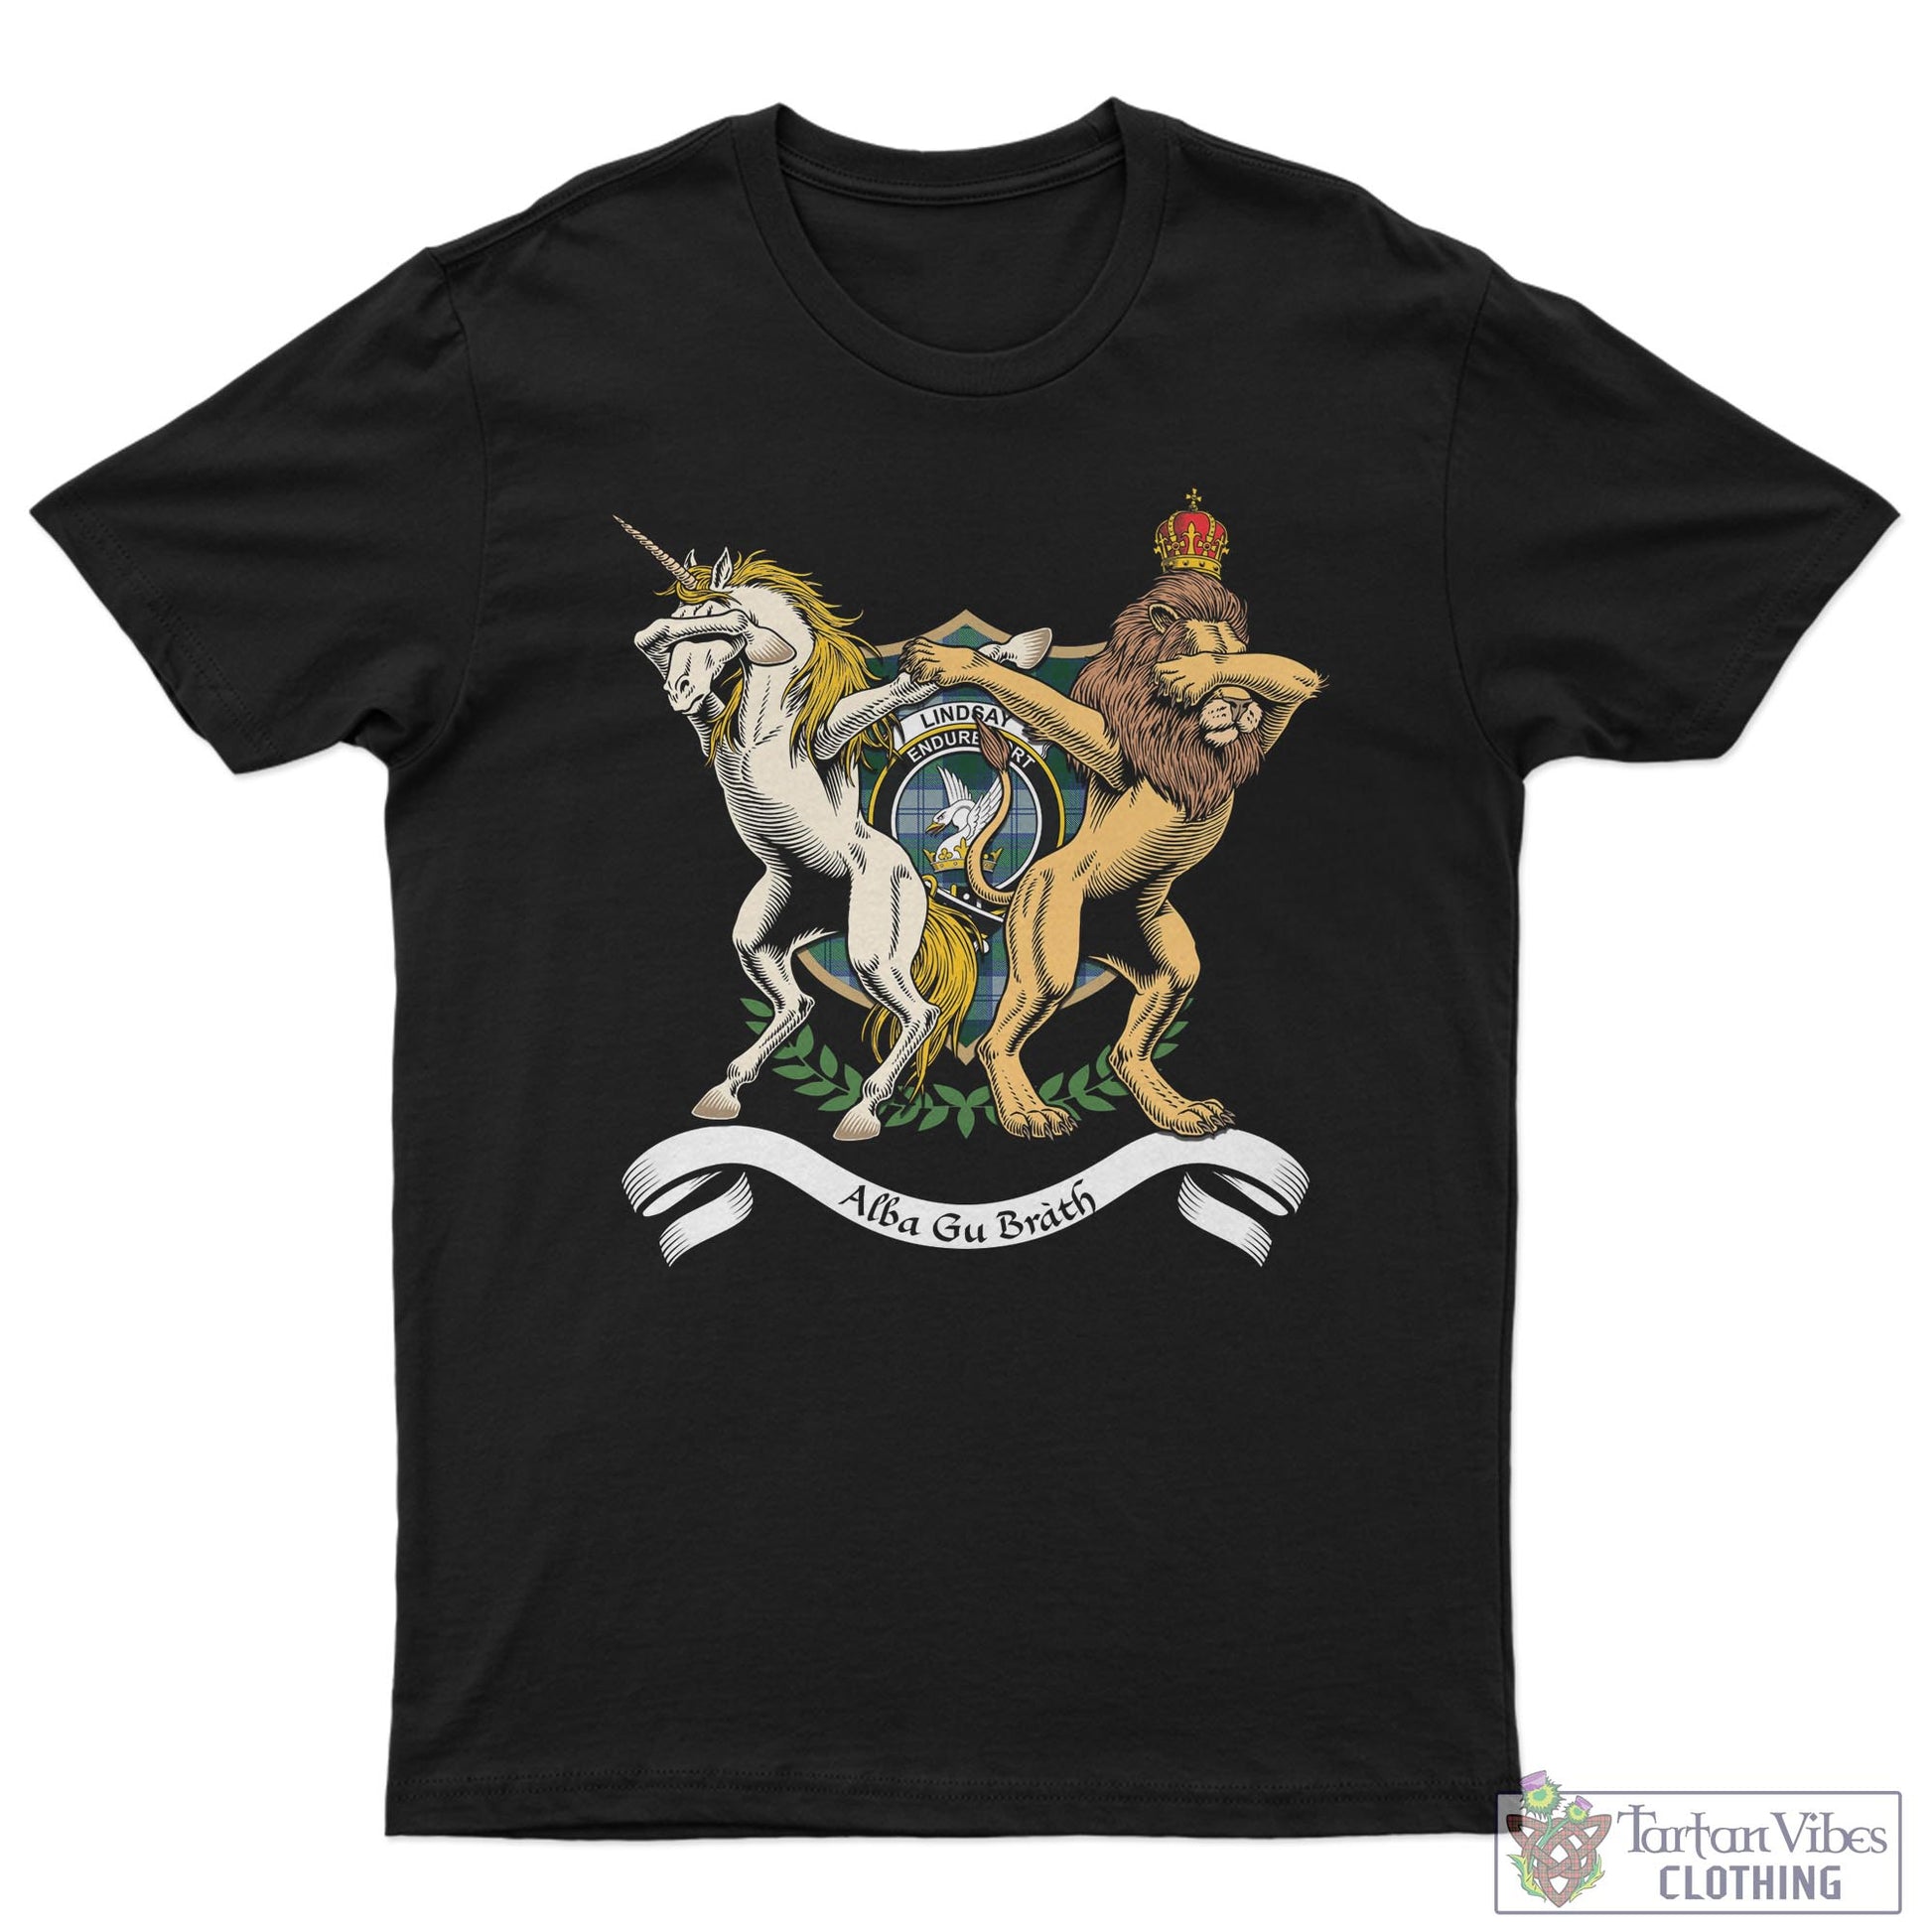 Tartan Vibes Clothing Lindsay Dress Family Crest Cotton Men's T-Shirt with Scotland Royal Coat Of Arm Funny Style